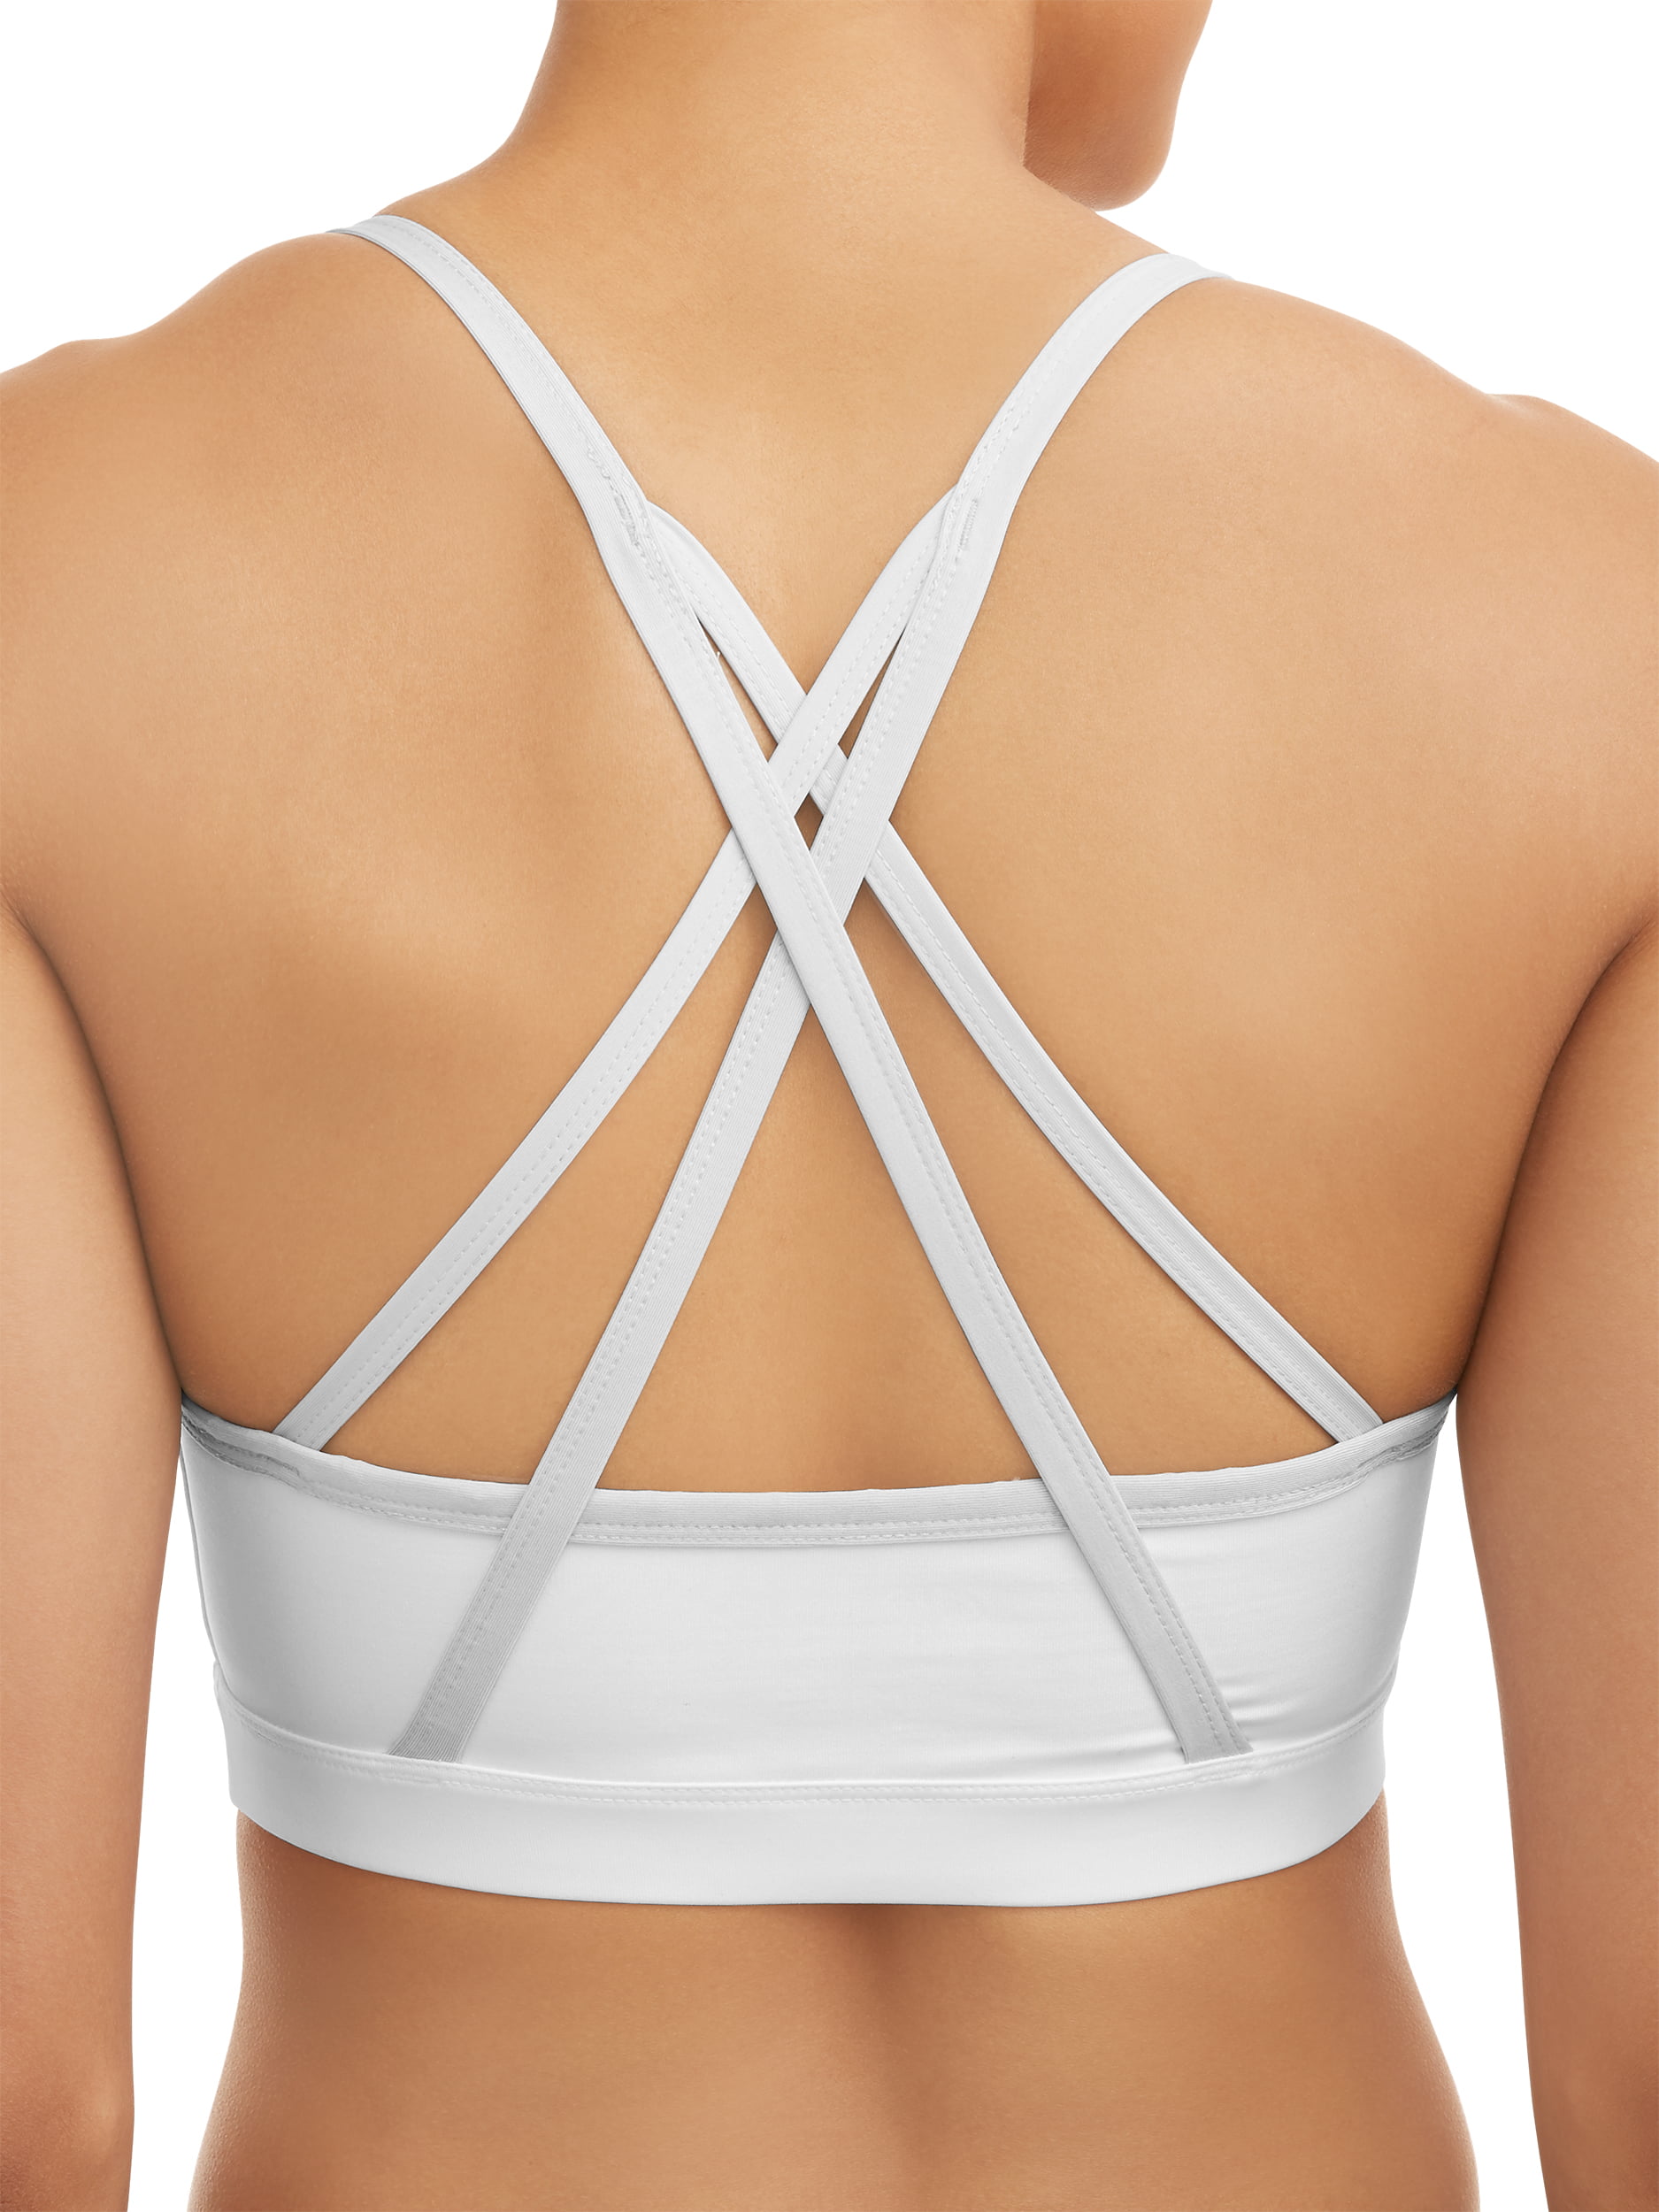 Athletic Works Womens Active Strappy Back Sports Bra #Ad #Womens